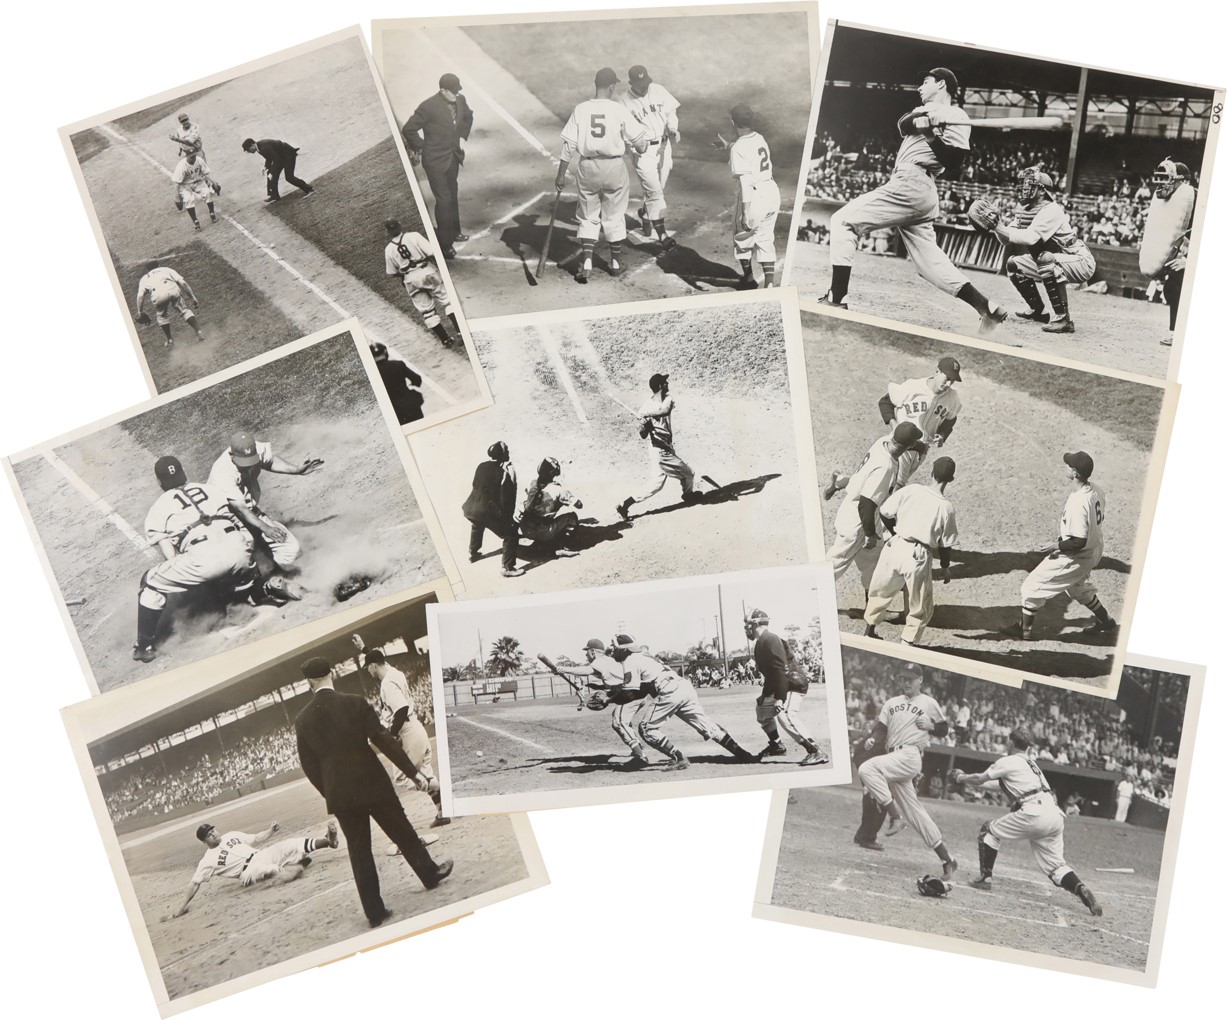 Vintage Sports Photographs - 1930s-50s Vintage Baseball Type I Action Photograph Archive with Hall of Famers (300+)